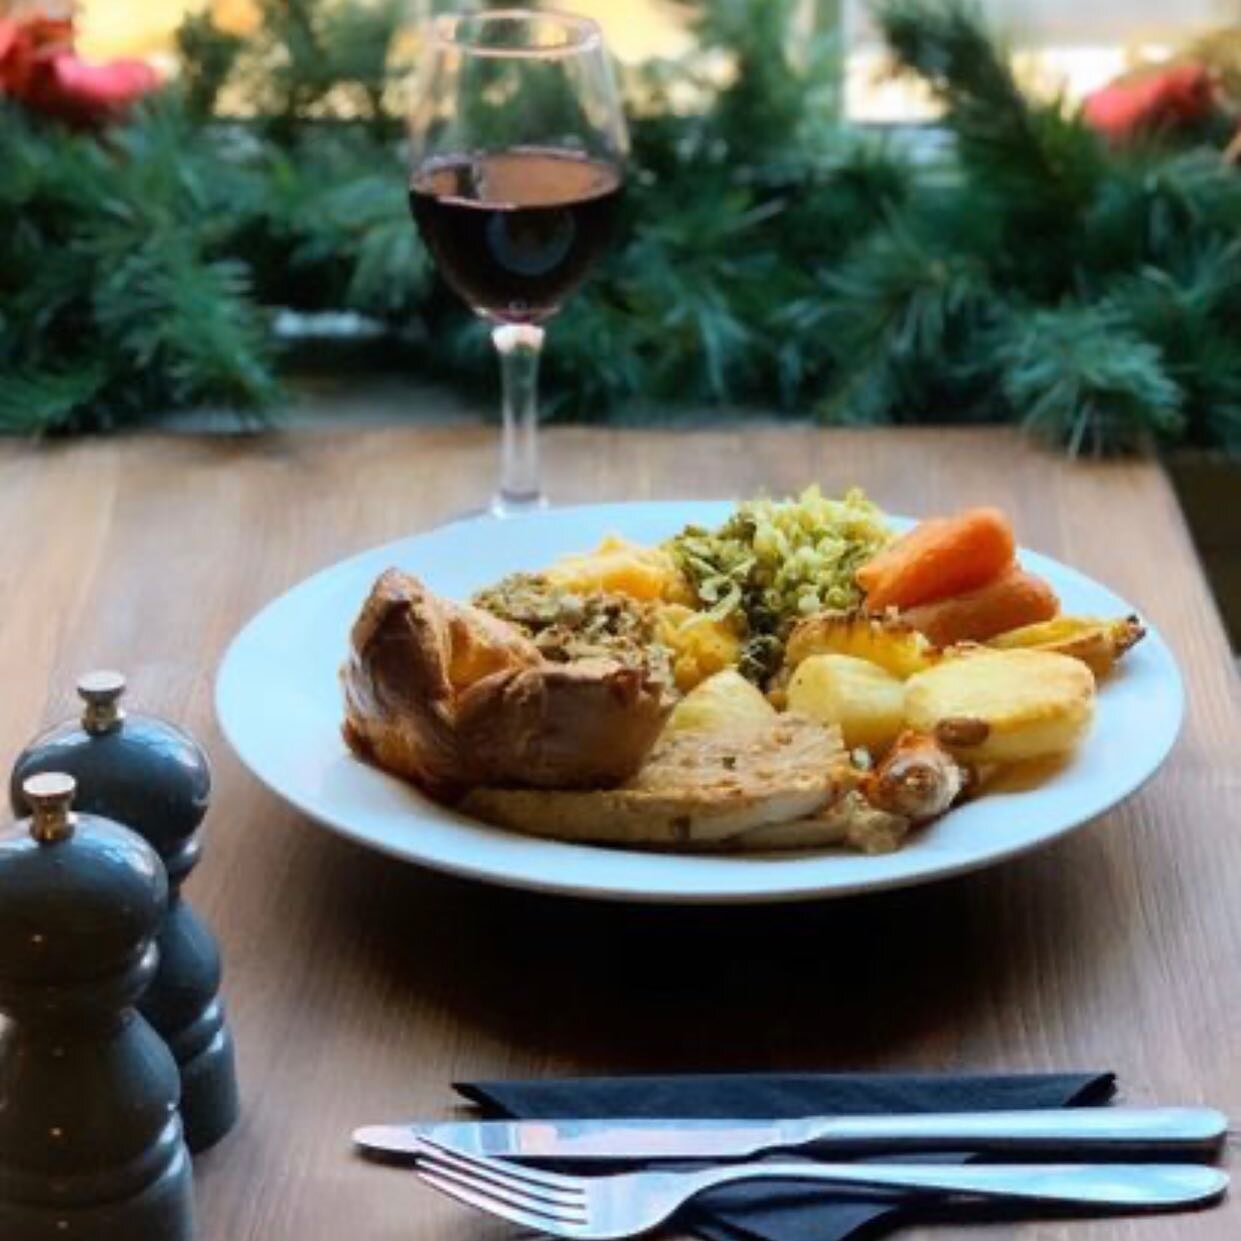 Yes, that&rsquo;s right... our delicious Sunday roasts are back! 🍷 follow the &lsquo;Book A Table&rsquo; link on our website
www.thebootandshoeinn.co.uk

#sundayroast #thebootandshoeinn #countrypub #villagepub #valeofbelvoir #nottinghamshire #newark